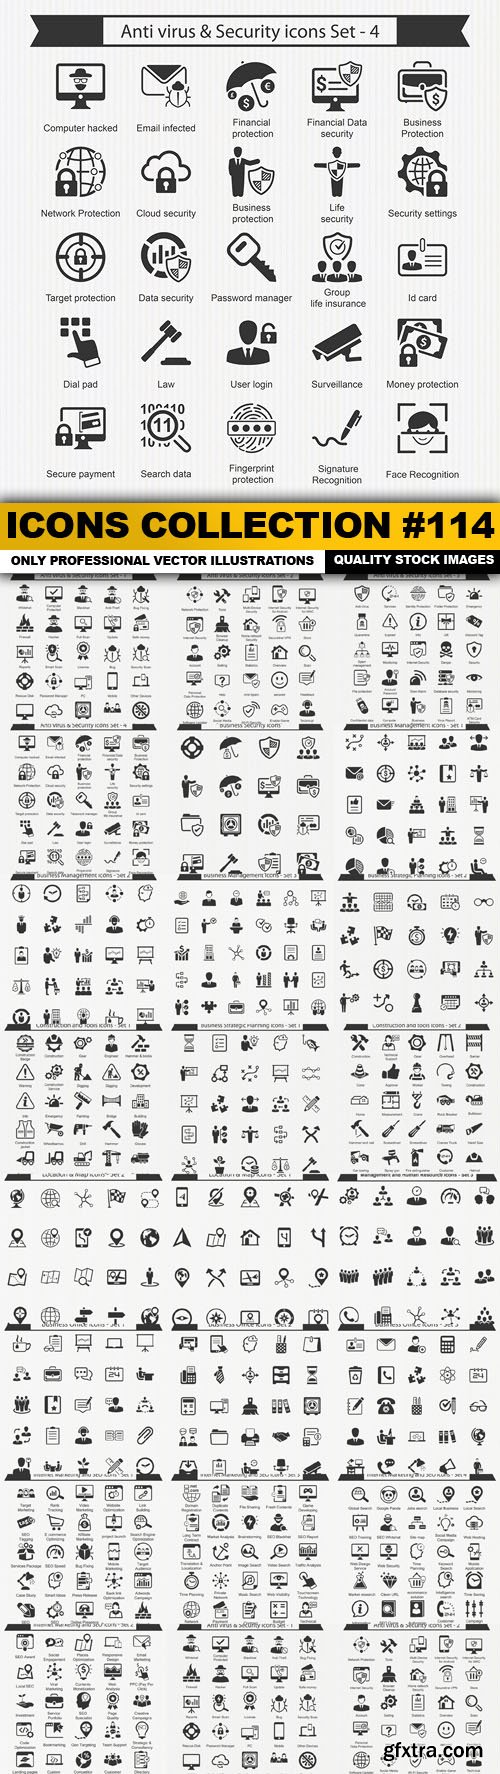 Icons Collection #114 - 22 Vector